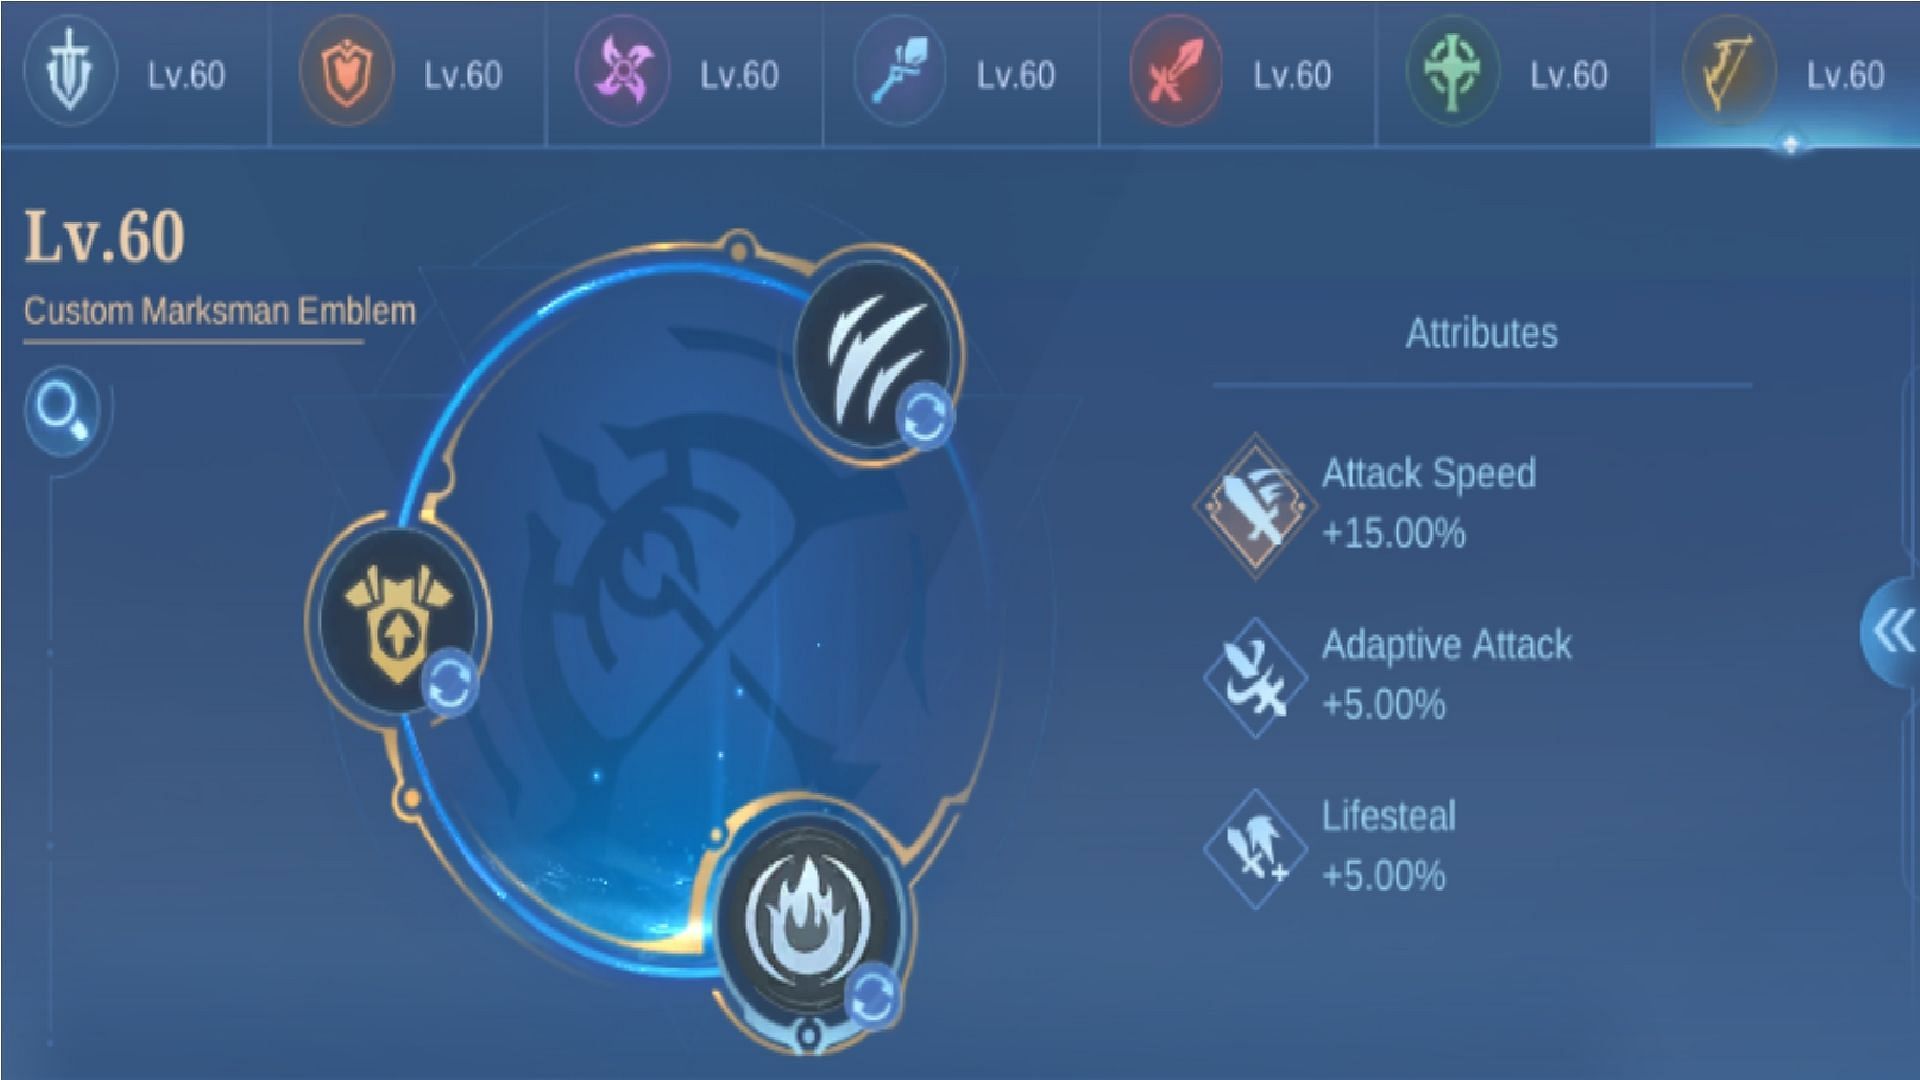 Marksman Emblem is a perfect suit for Miya, Image for reference only (Image via Moonton Games)